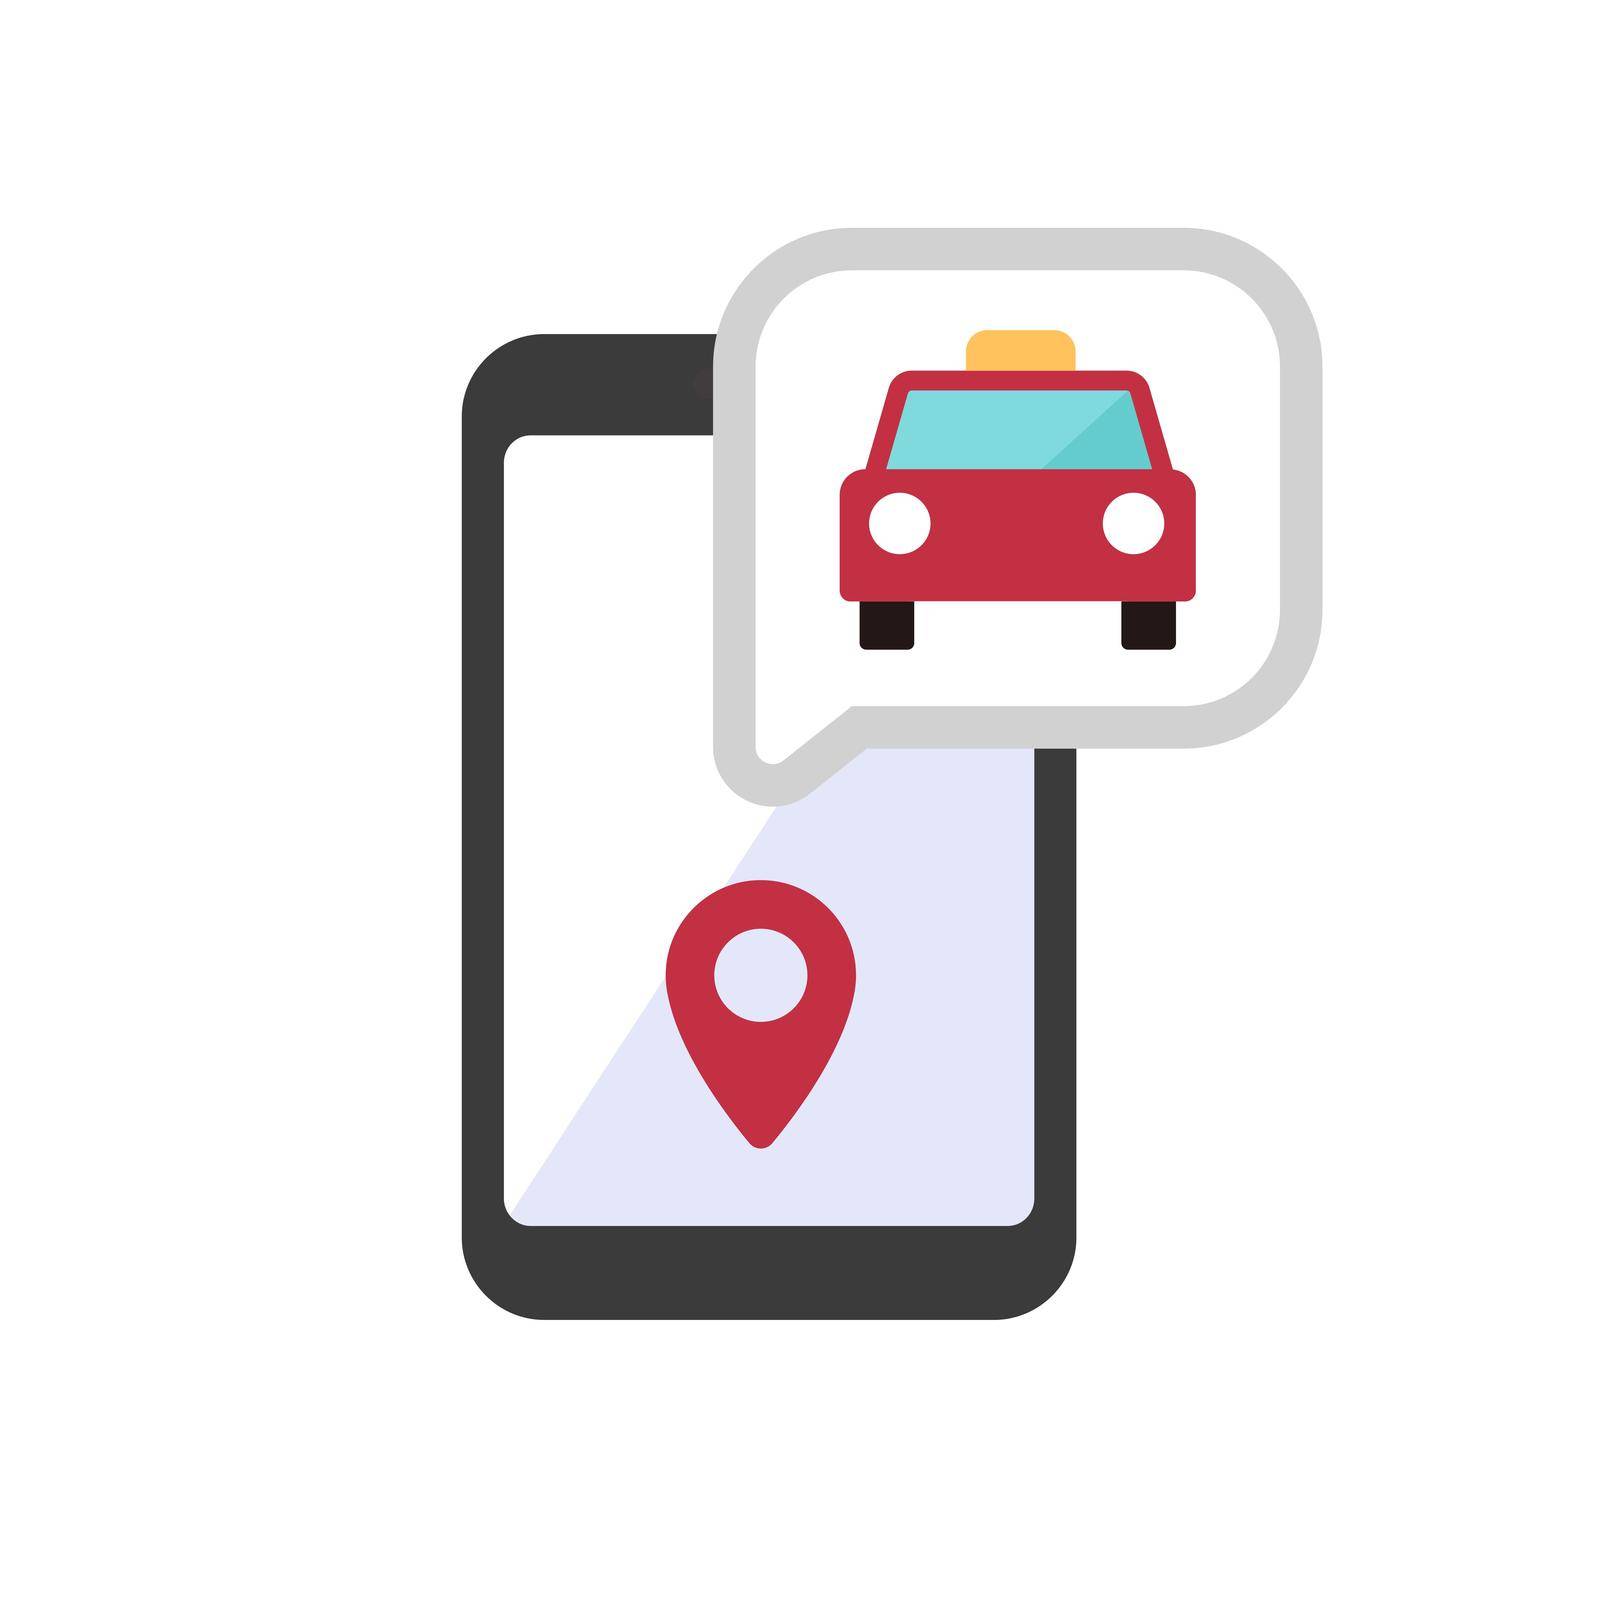 Taxi (cab) app, ride share app vector icon illustration by barks